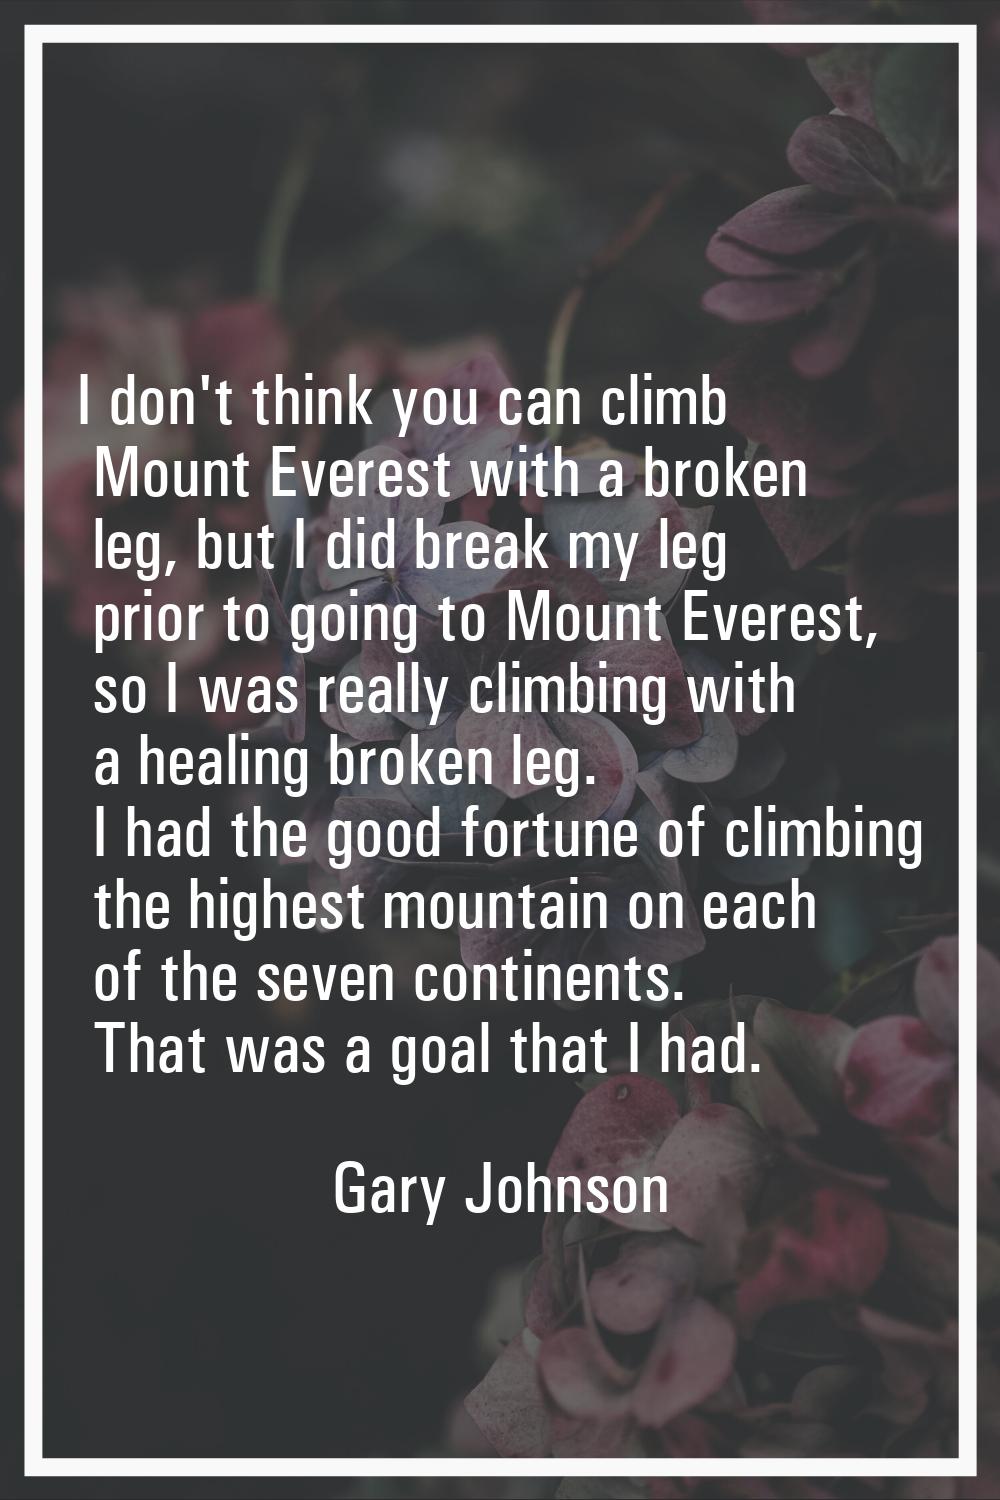 I don't think you can climb Mount Everest with a broken leg, but I did break my leg prior to going 